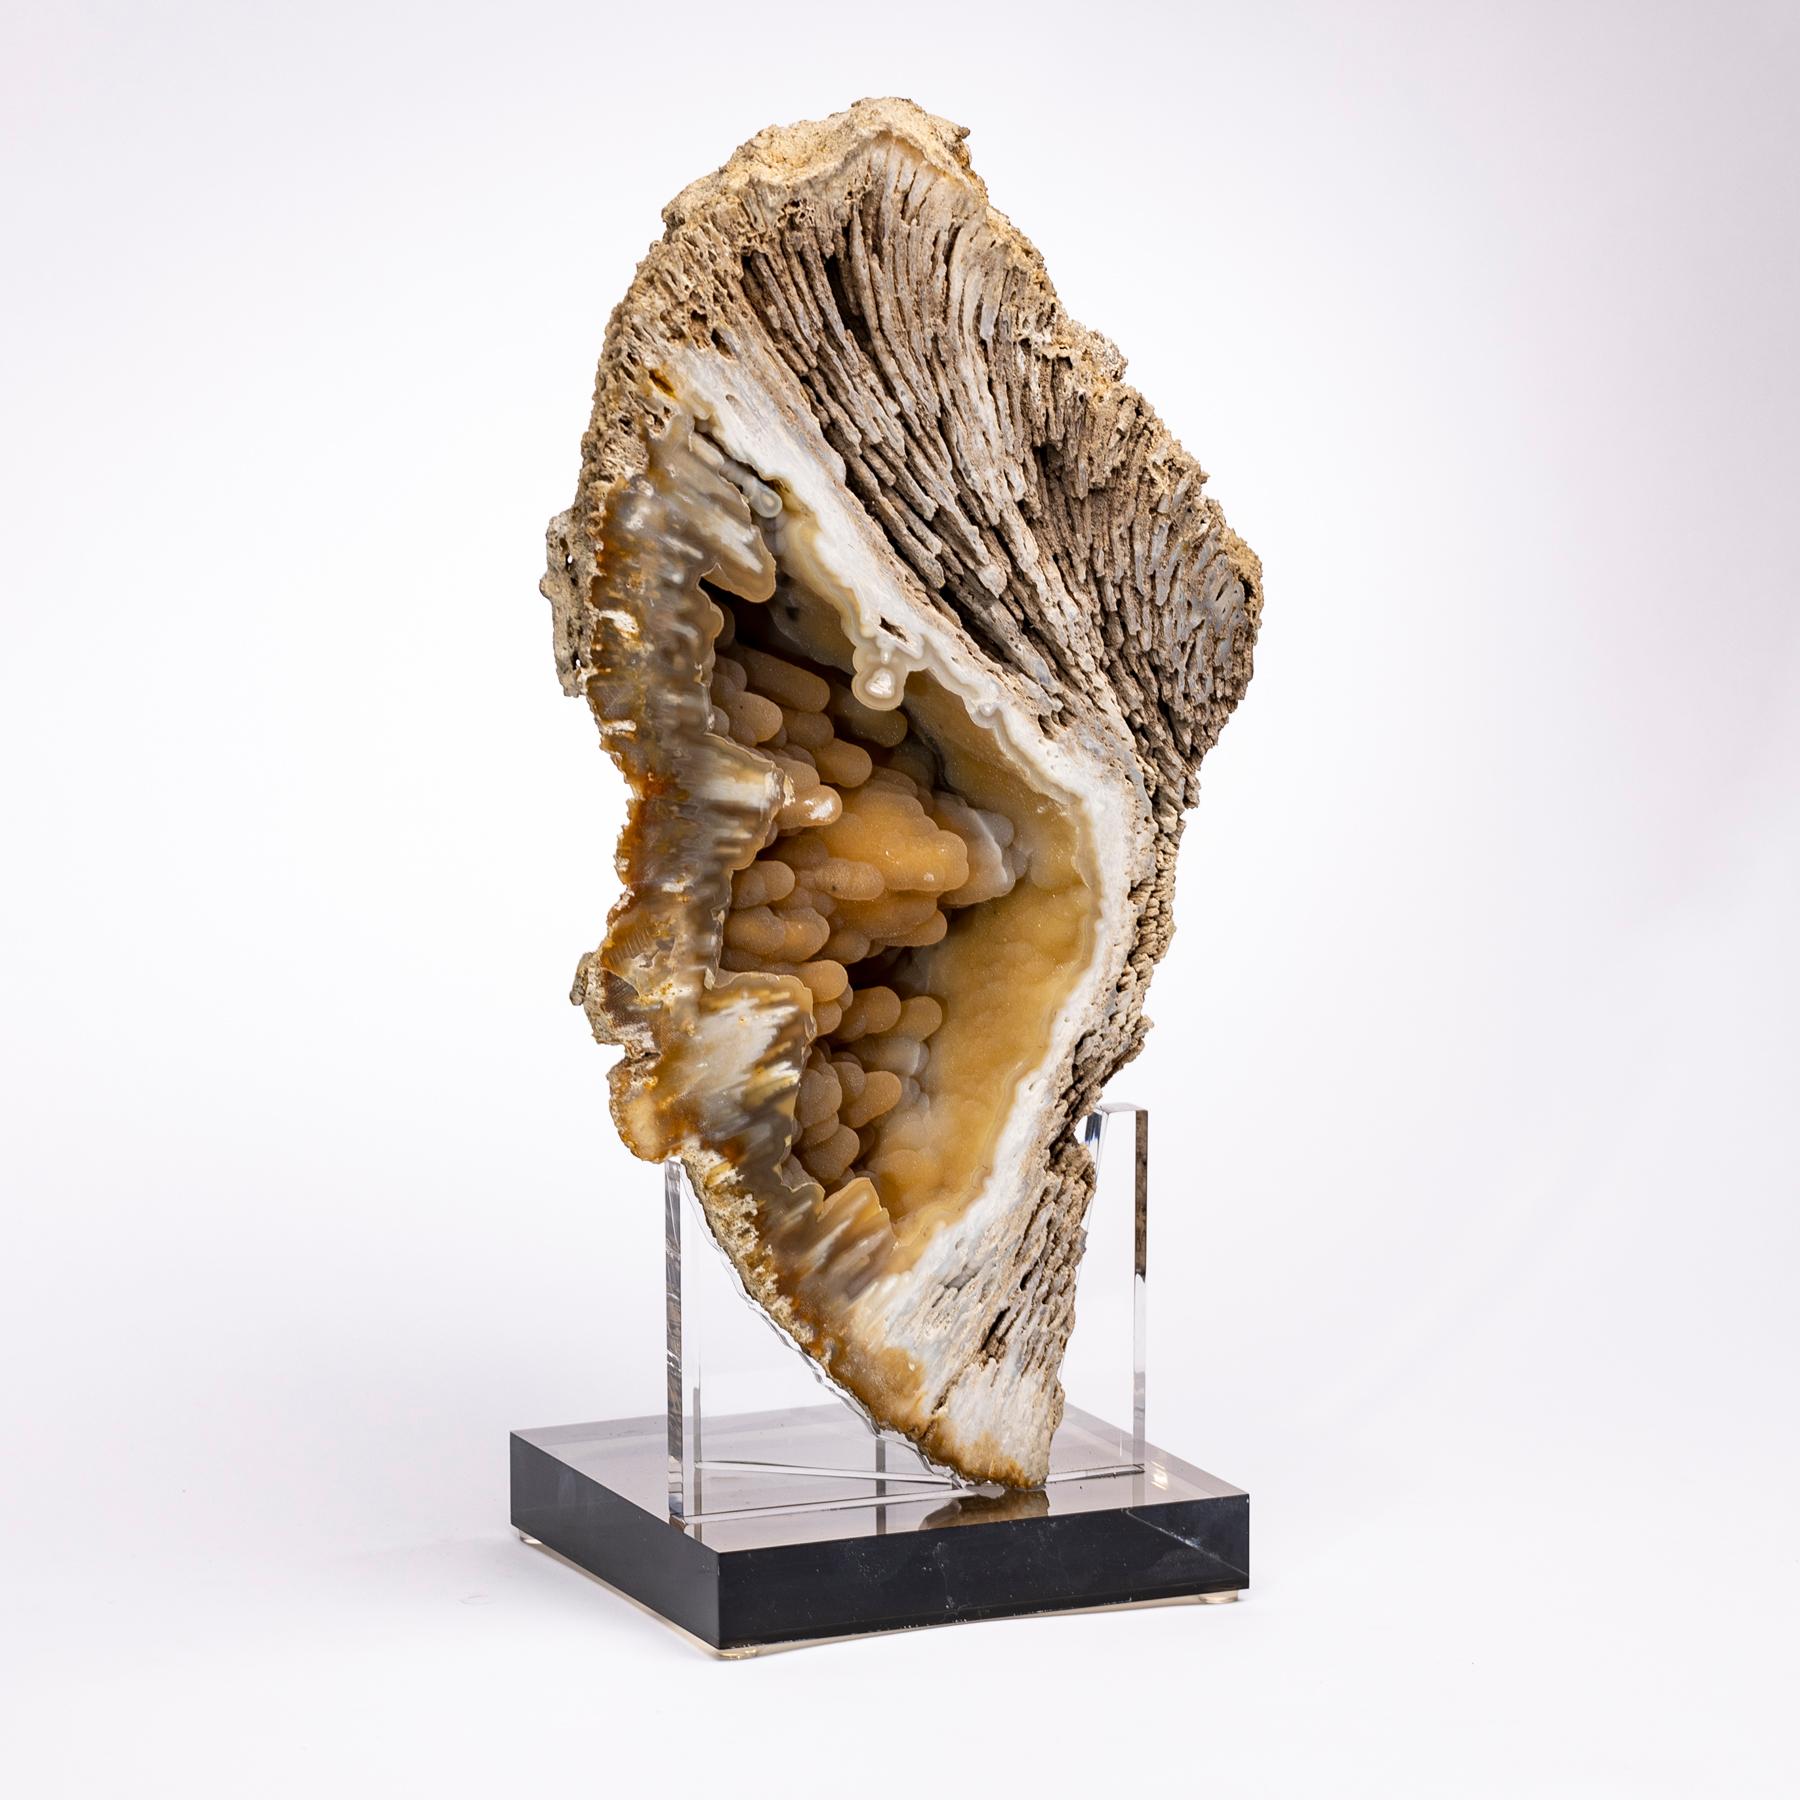 Superb agatized coral from Florida mounted on a custom acrylic stand.